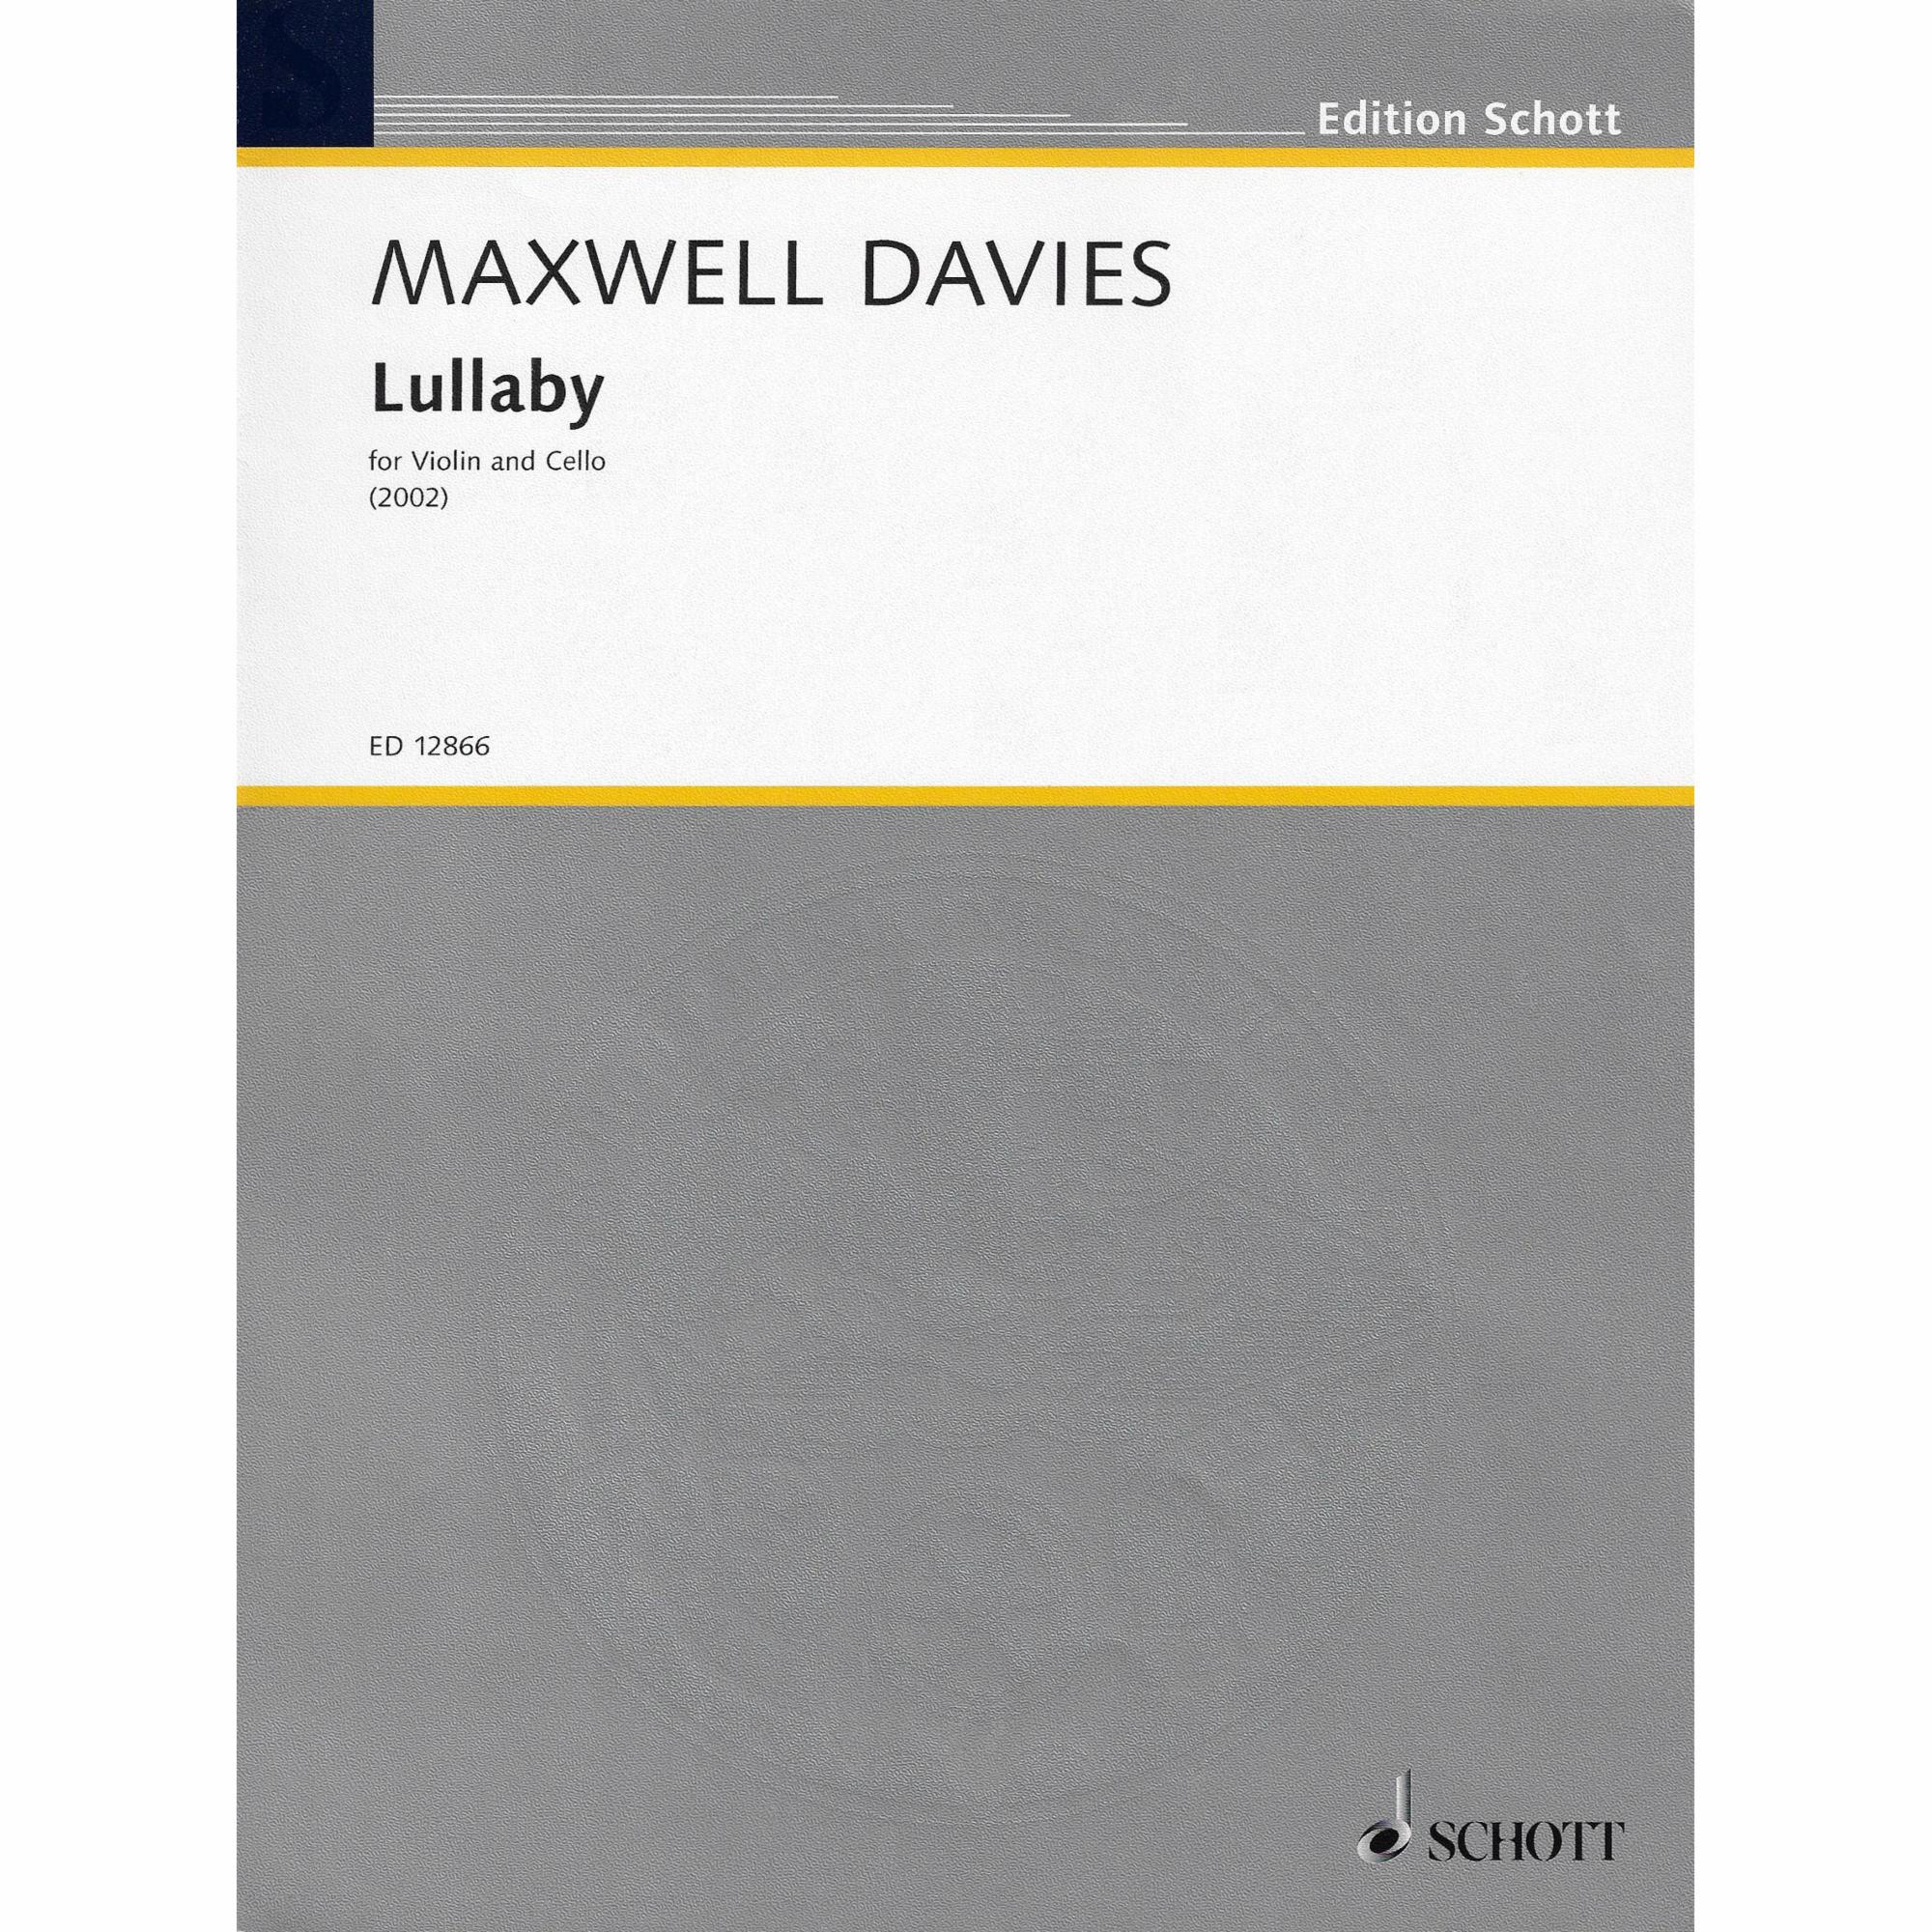 Maxwell Davies -- Lullaby for Violin and Cello